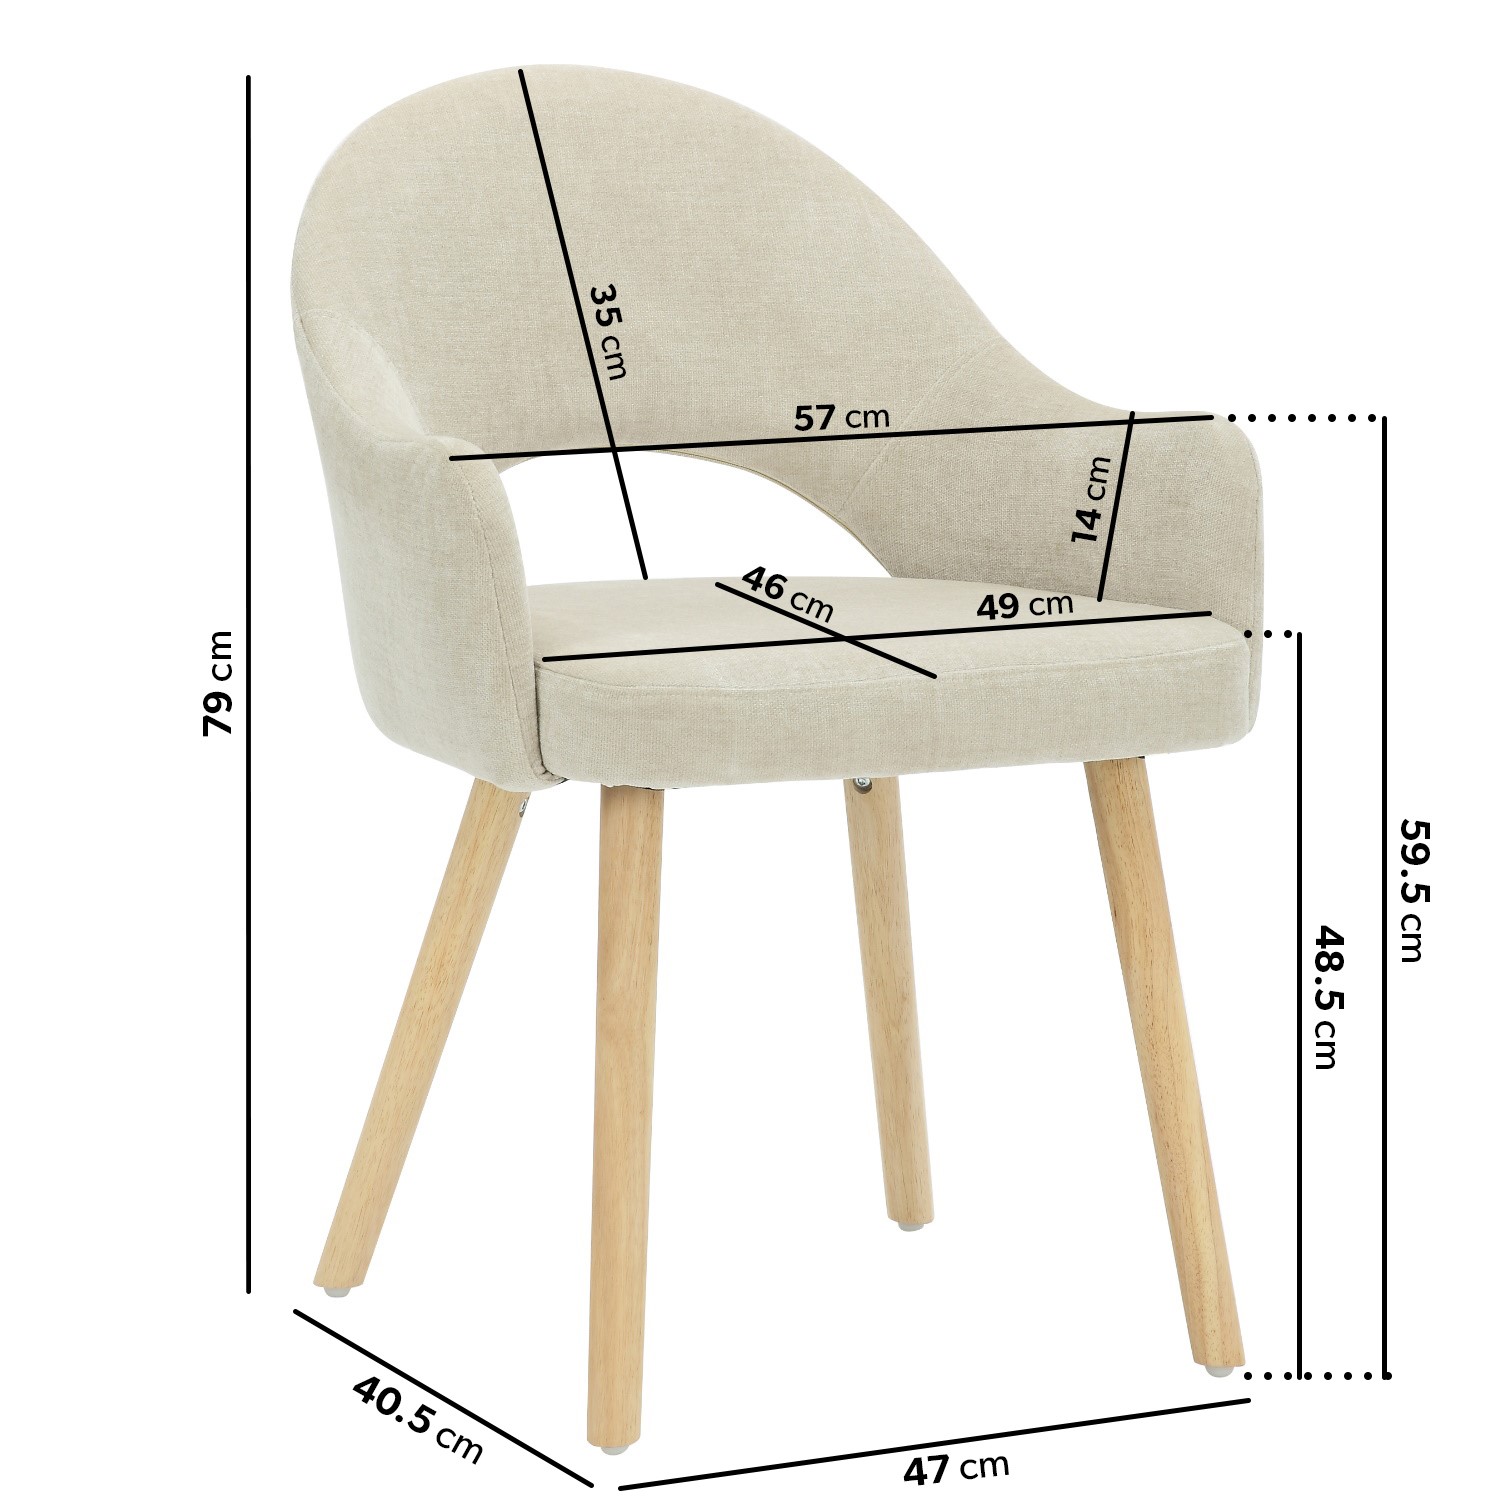 Read more about Set of 2 beige fabric dining chairs with oak legs colbie